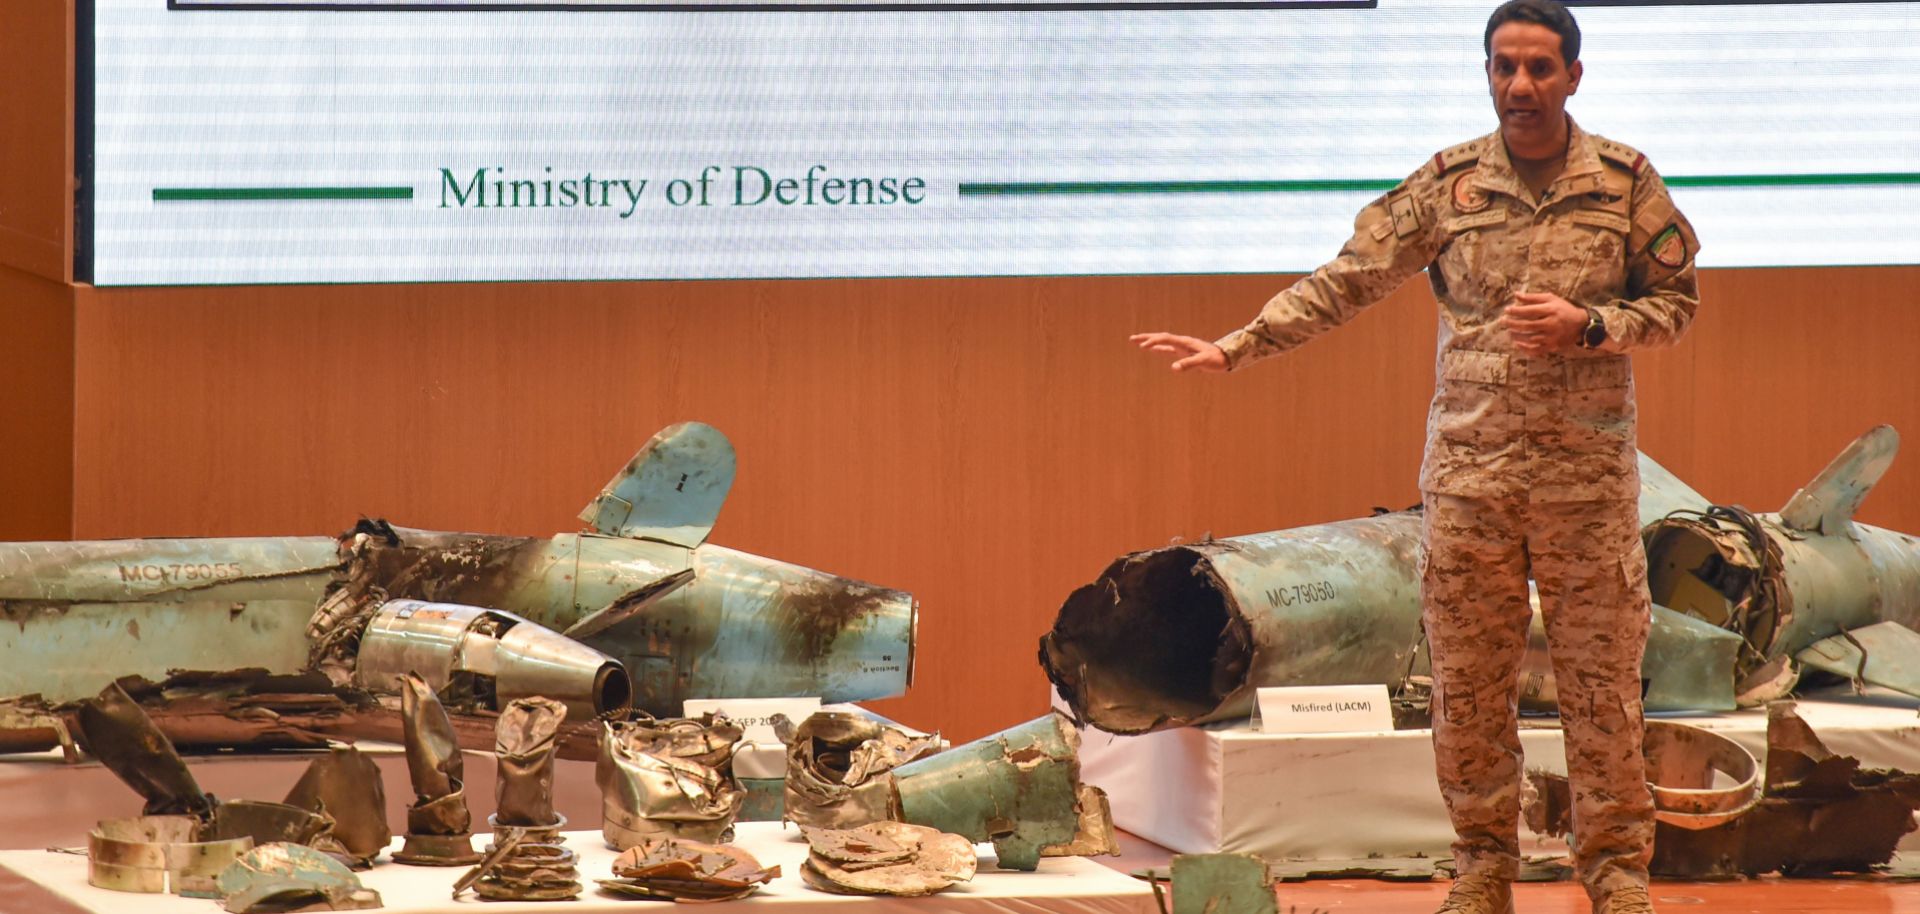 Saudi Defense Ministry spokesman Col. Turki al-Malki displays pieces of what he said were Iranian cruise missiles and drones recovered from an attack on Saudi oil facilities, during a press conference in Riyadh on Sept. 18, 2019.